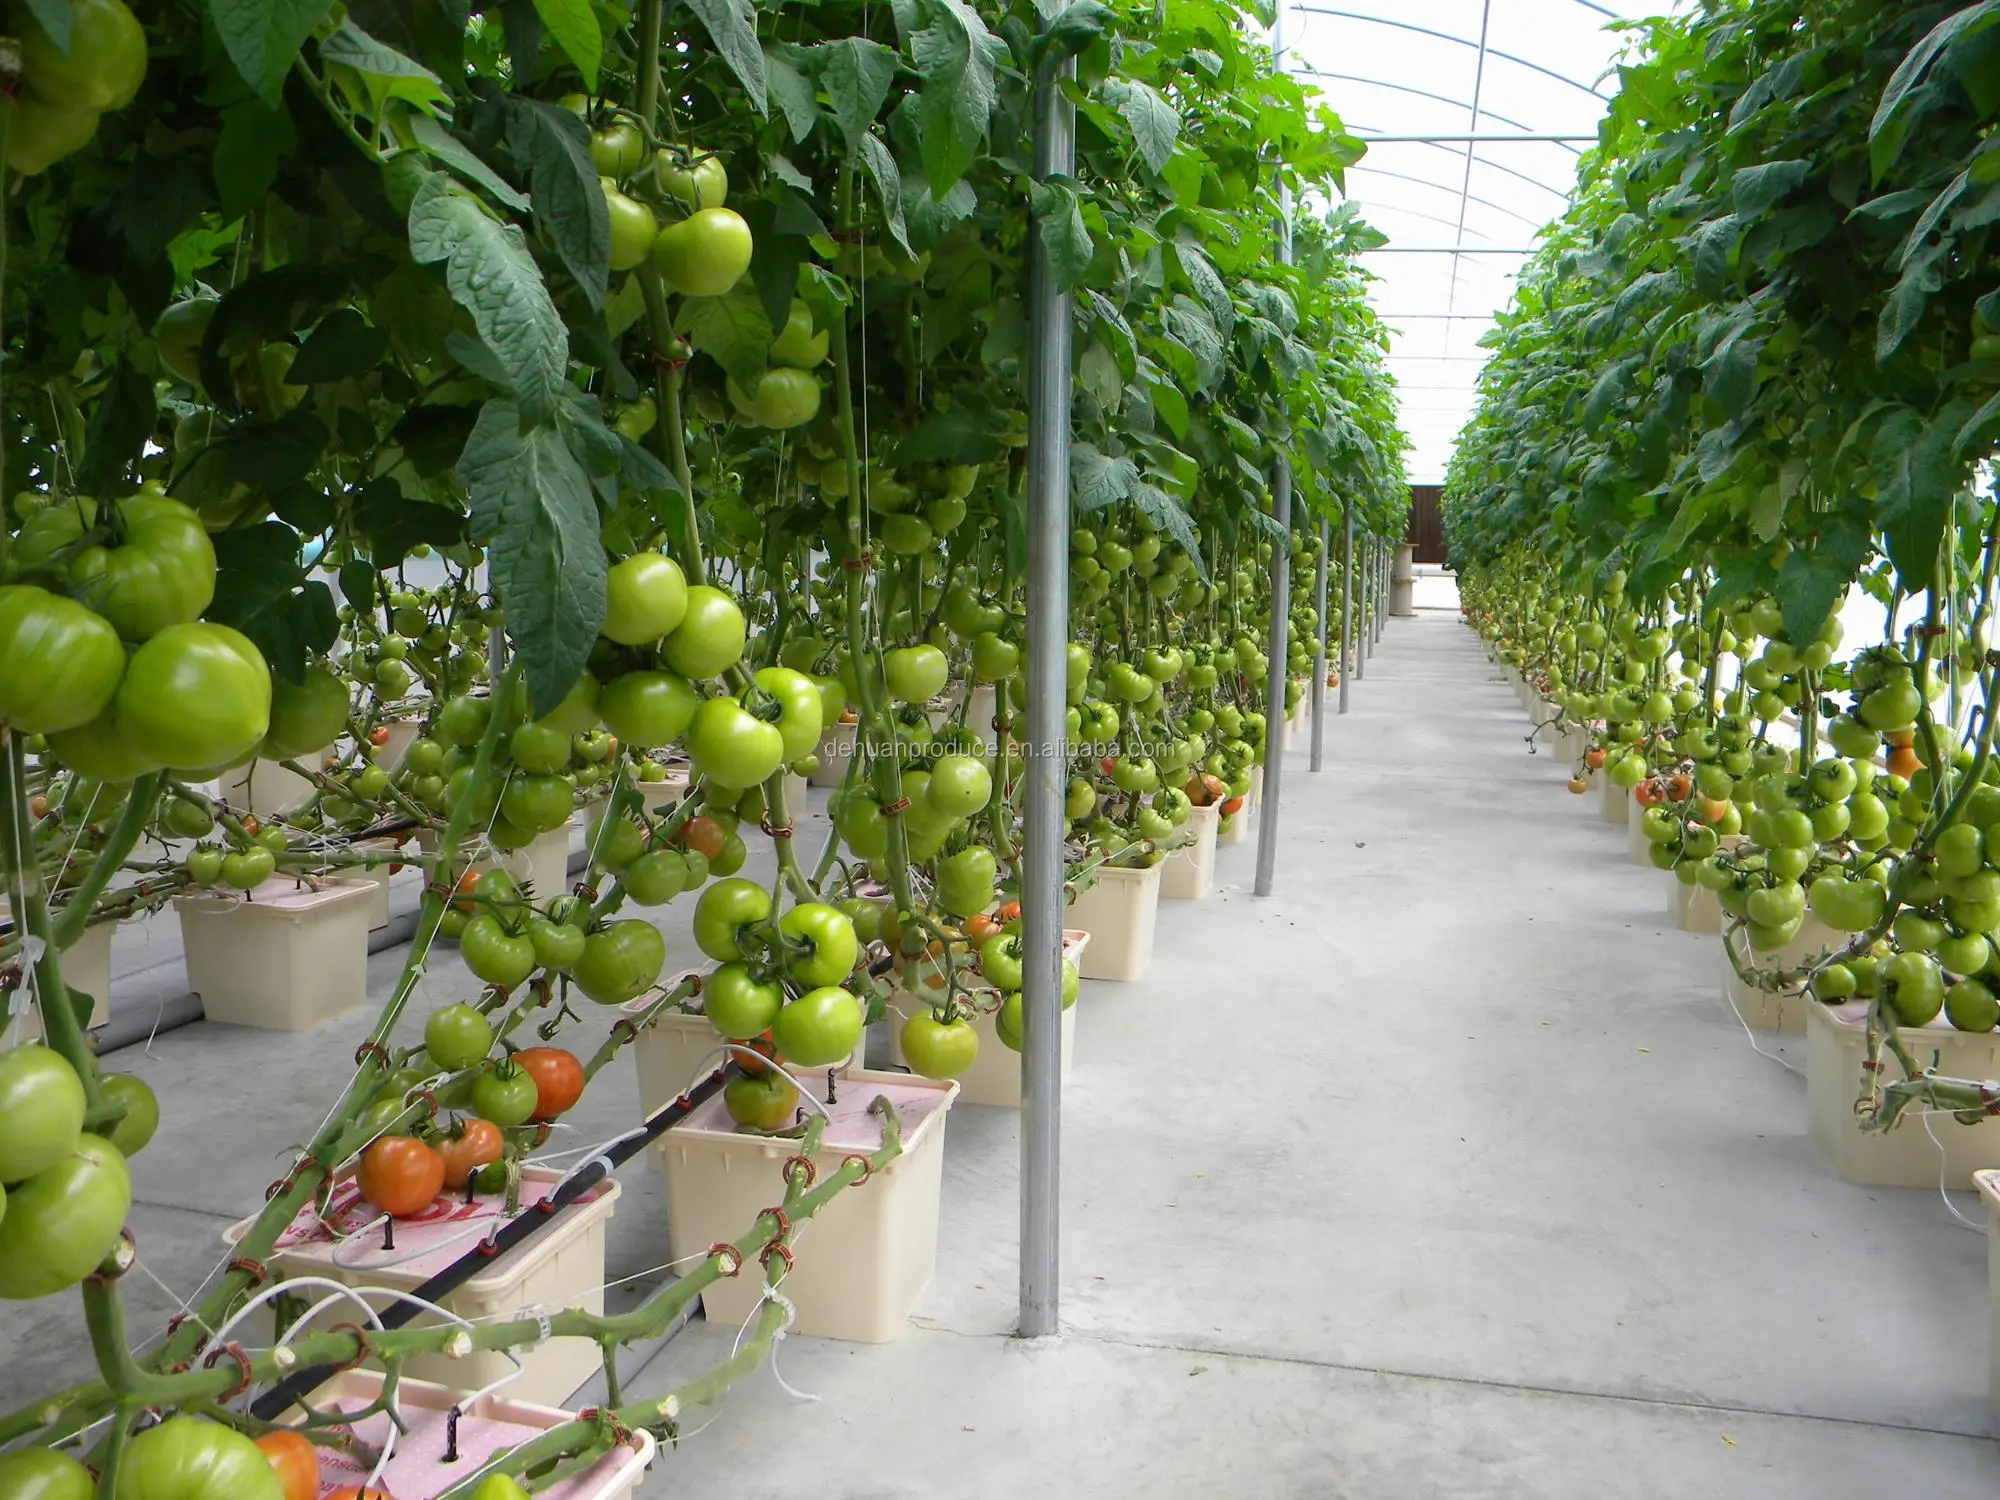 Nature Hydro Vertical Hydroponic Growing Systems Buy Hydroponic System Hydroponic Growing System Vertical Grow Systems Product On Alibaba Com